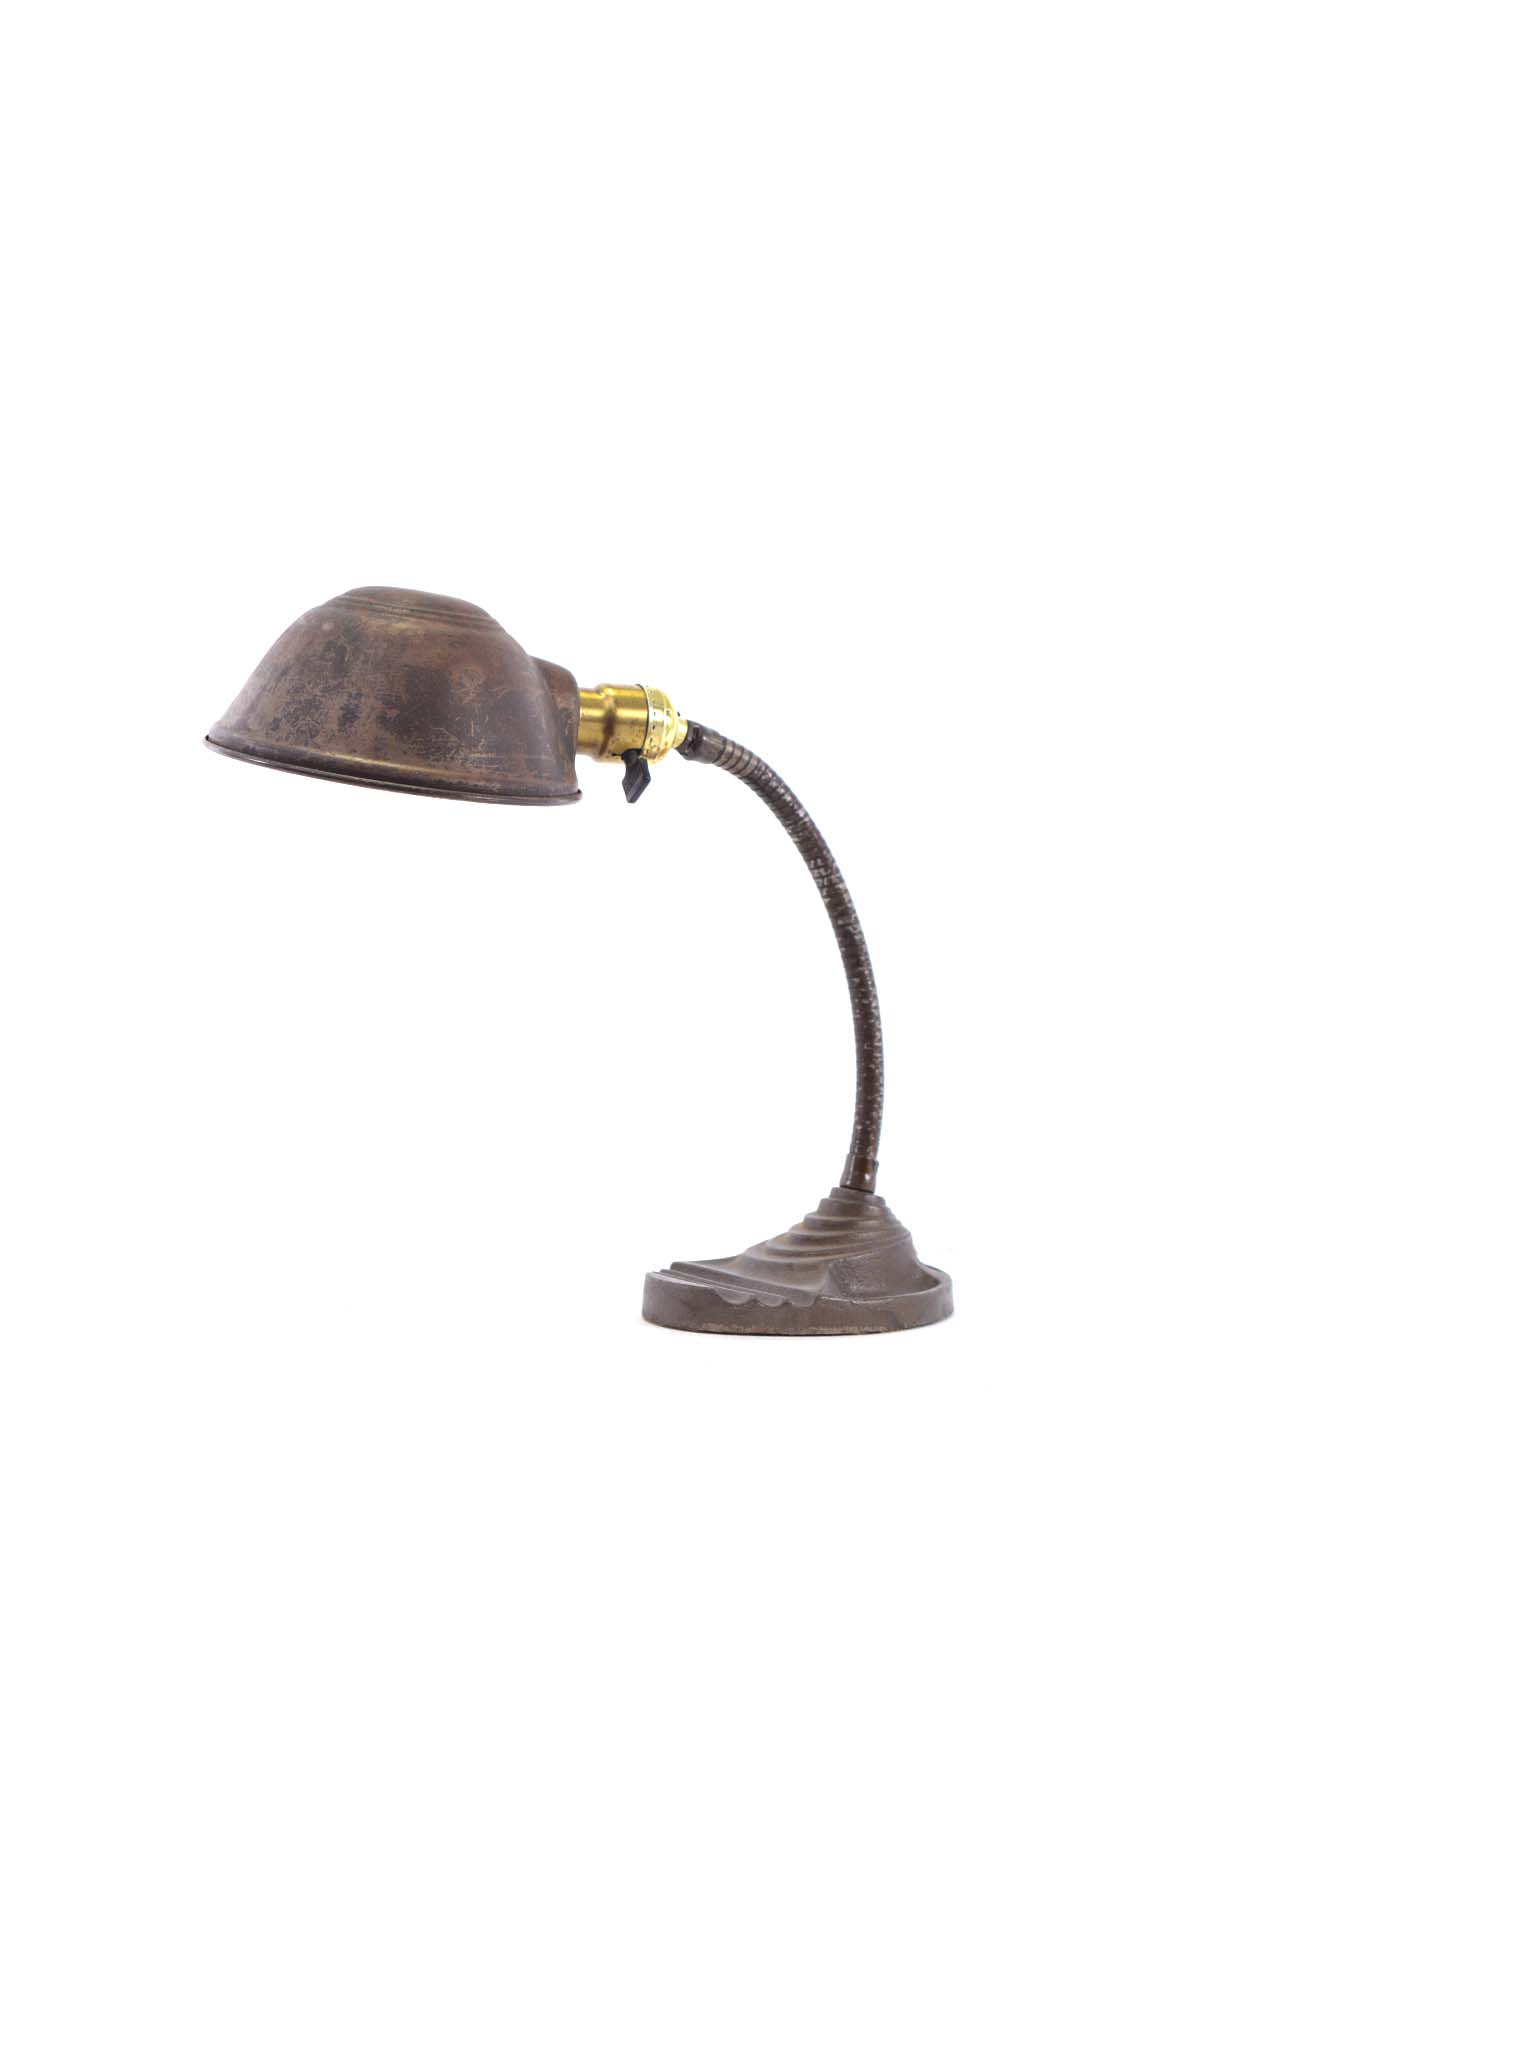 INDUSTRIAL ART DECO LAMP BY EAGLE USA